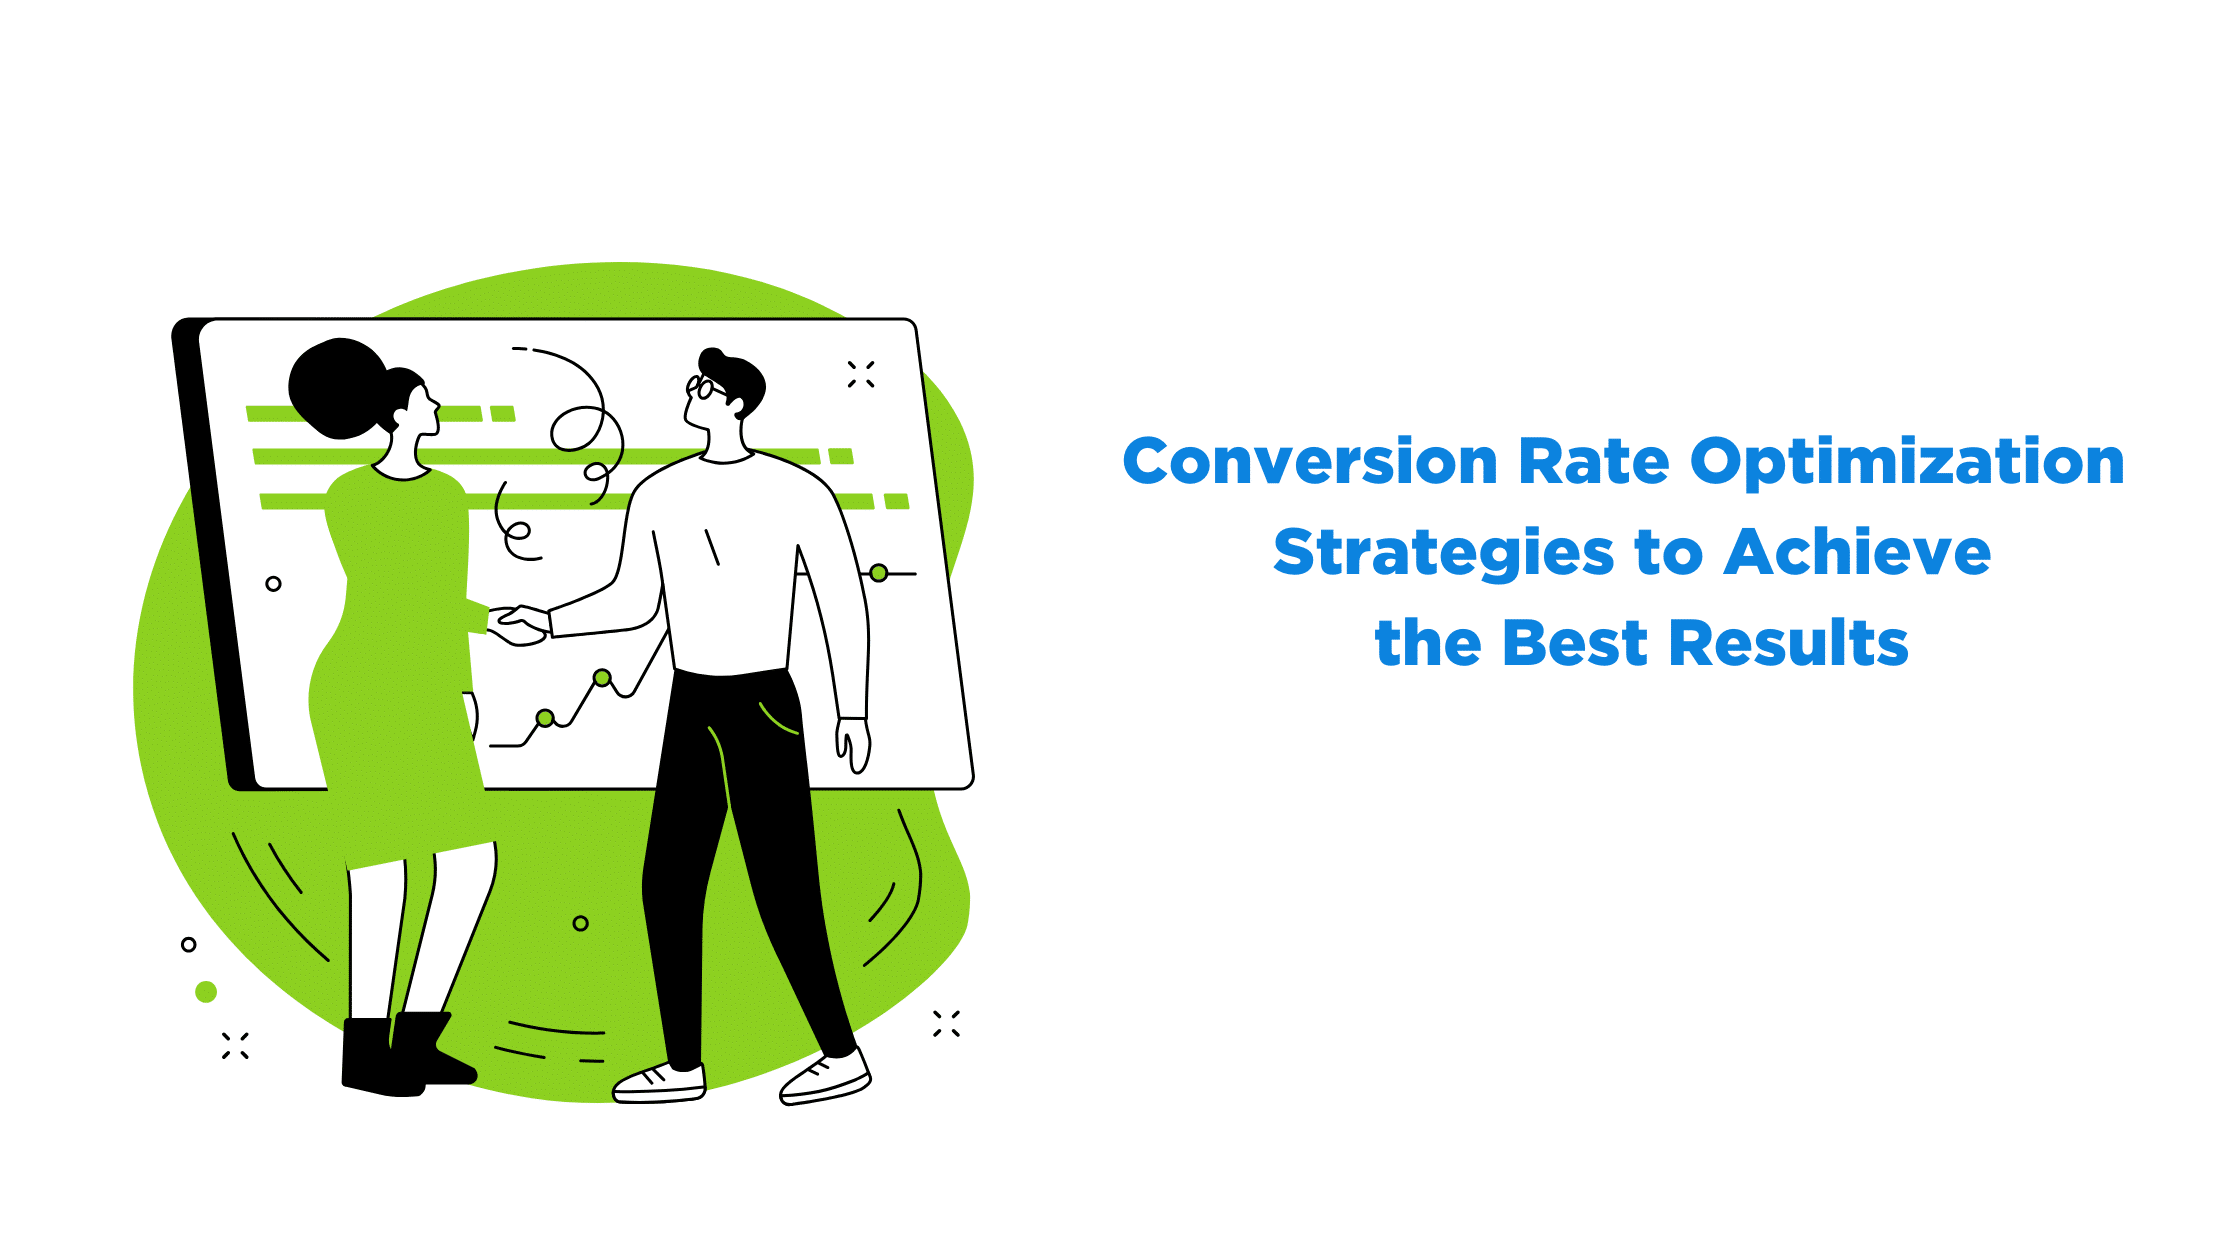 Conversion Rate Optimization Strategies to Achieve